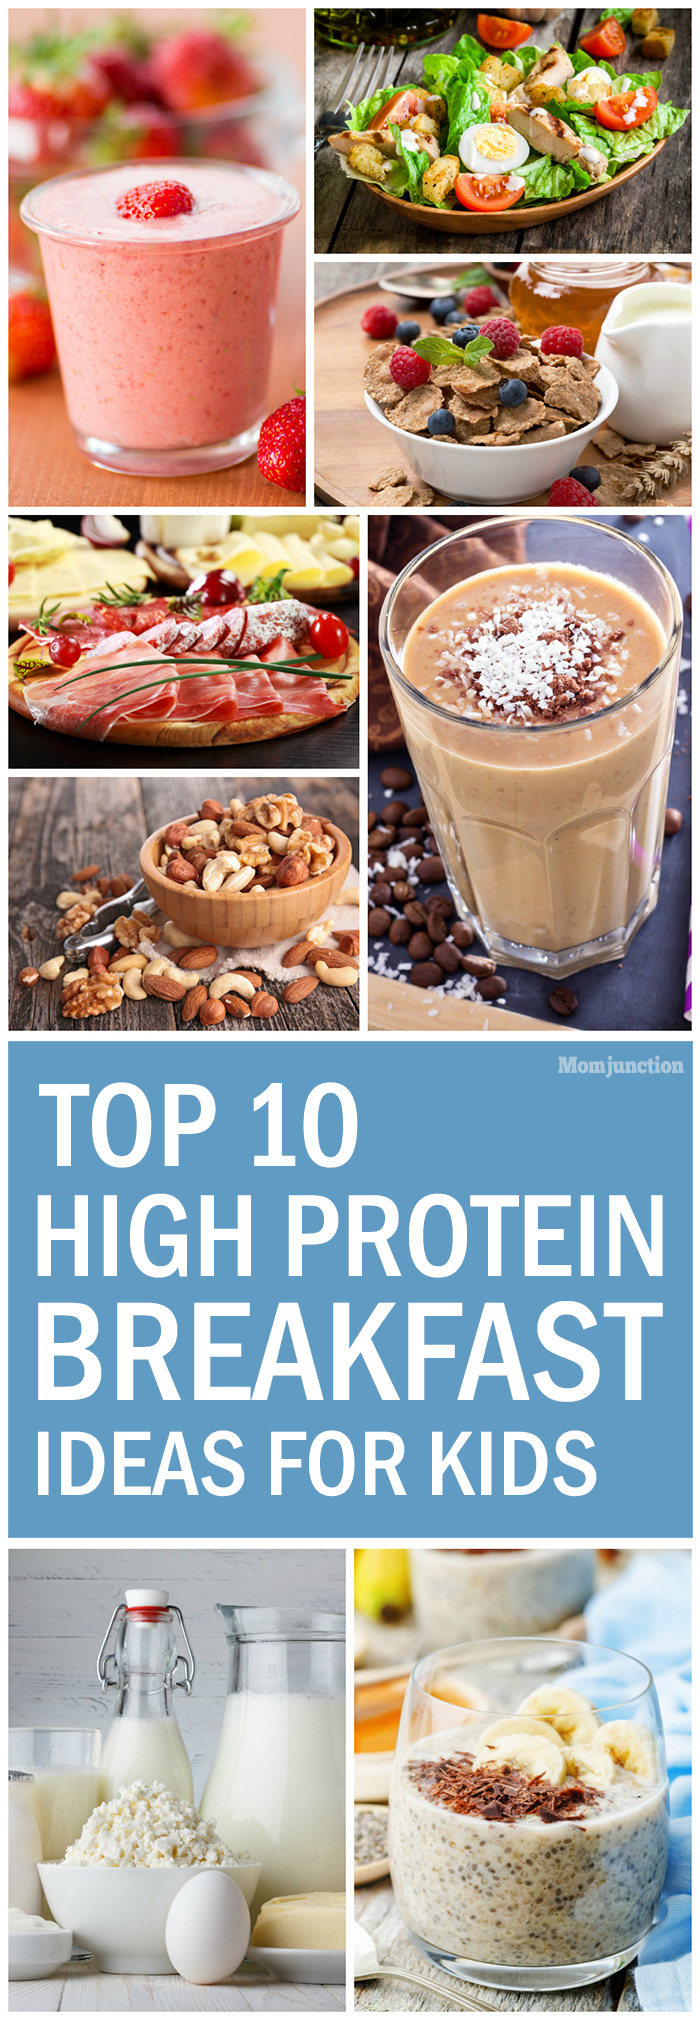 High Protein Breakfast For Kids - Top 10 Ideas